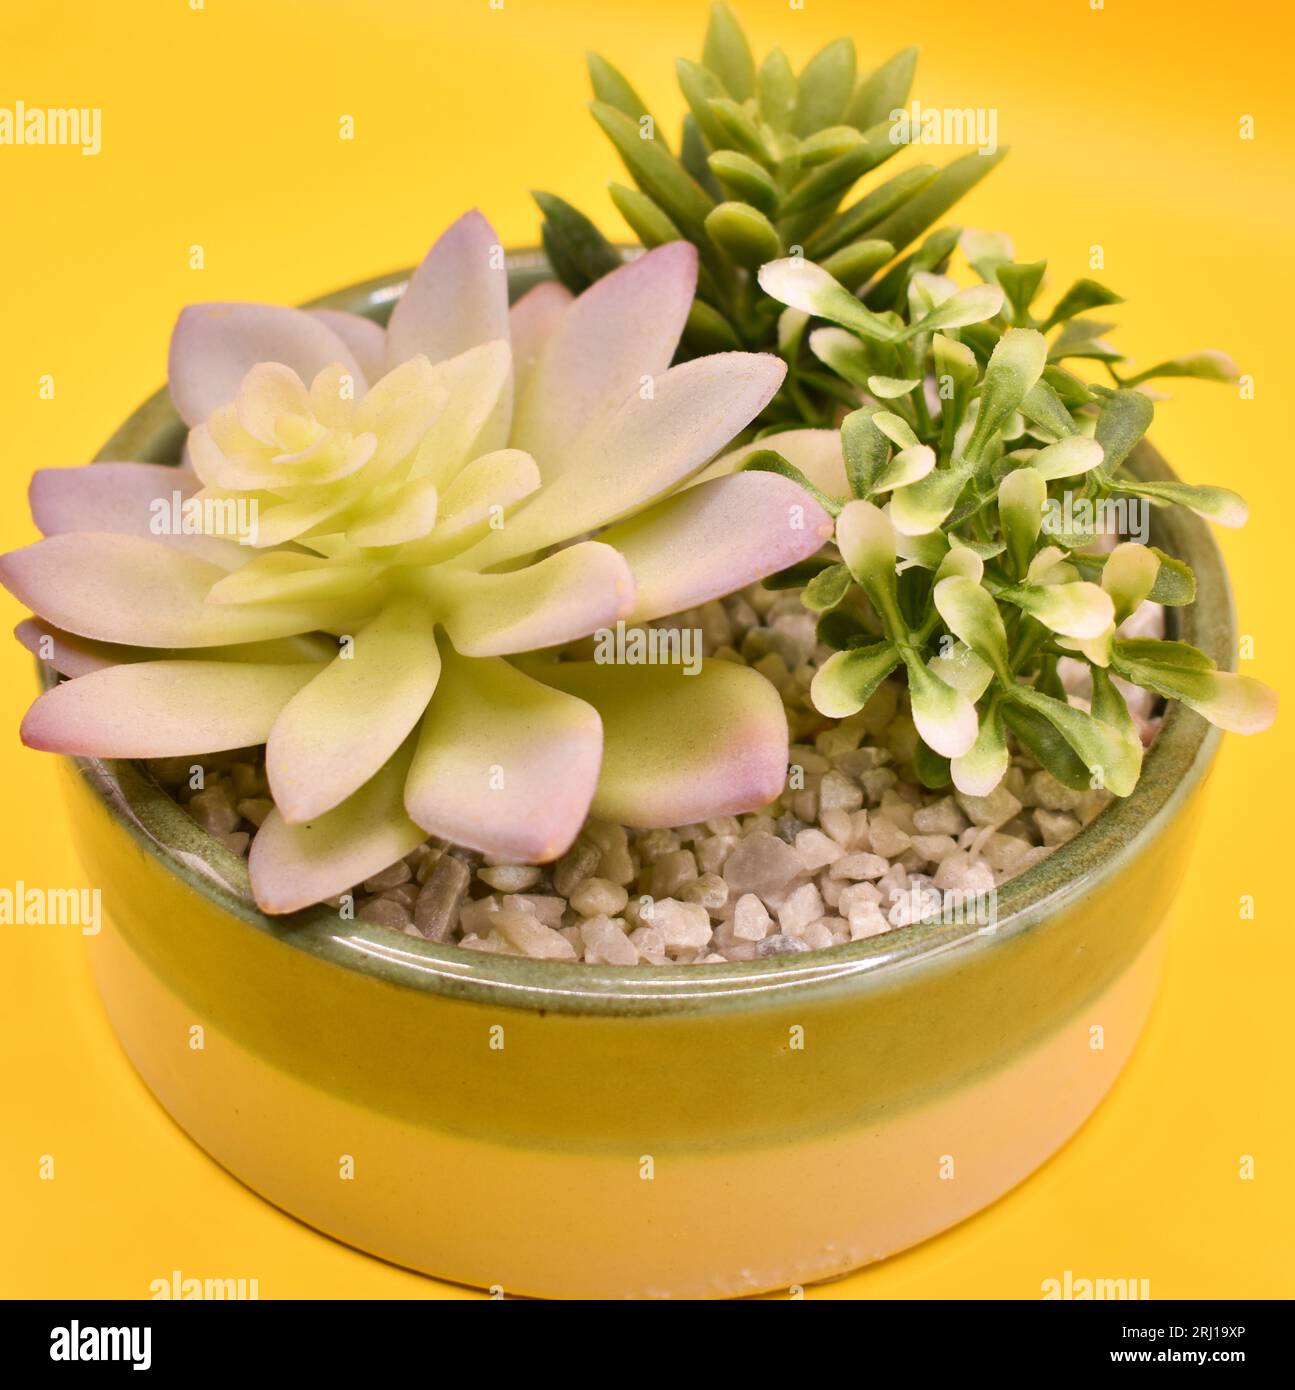 A round shallow bowl containing an artificial plant and some small stones. Stock Photo